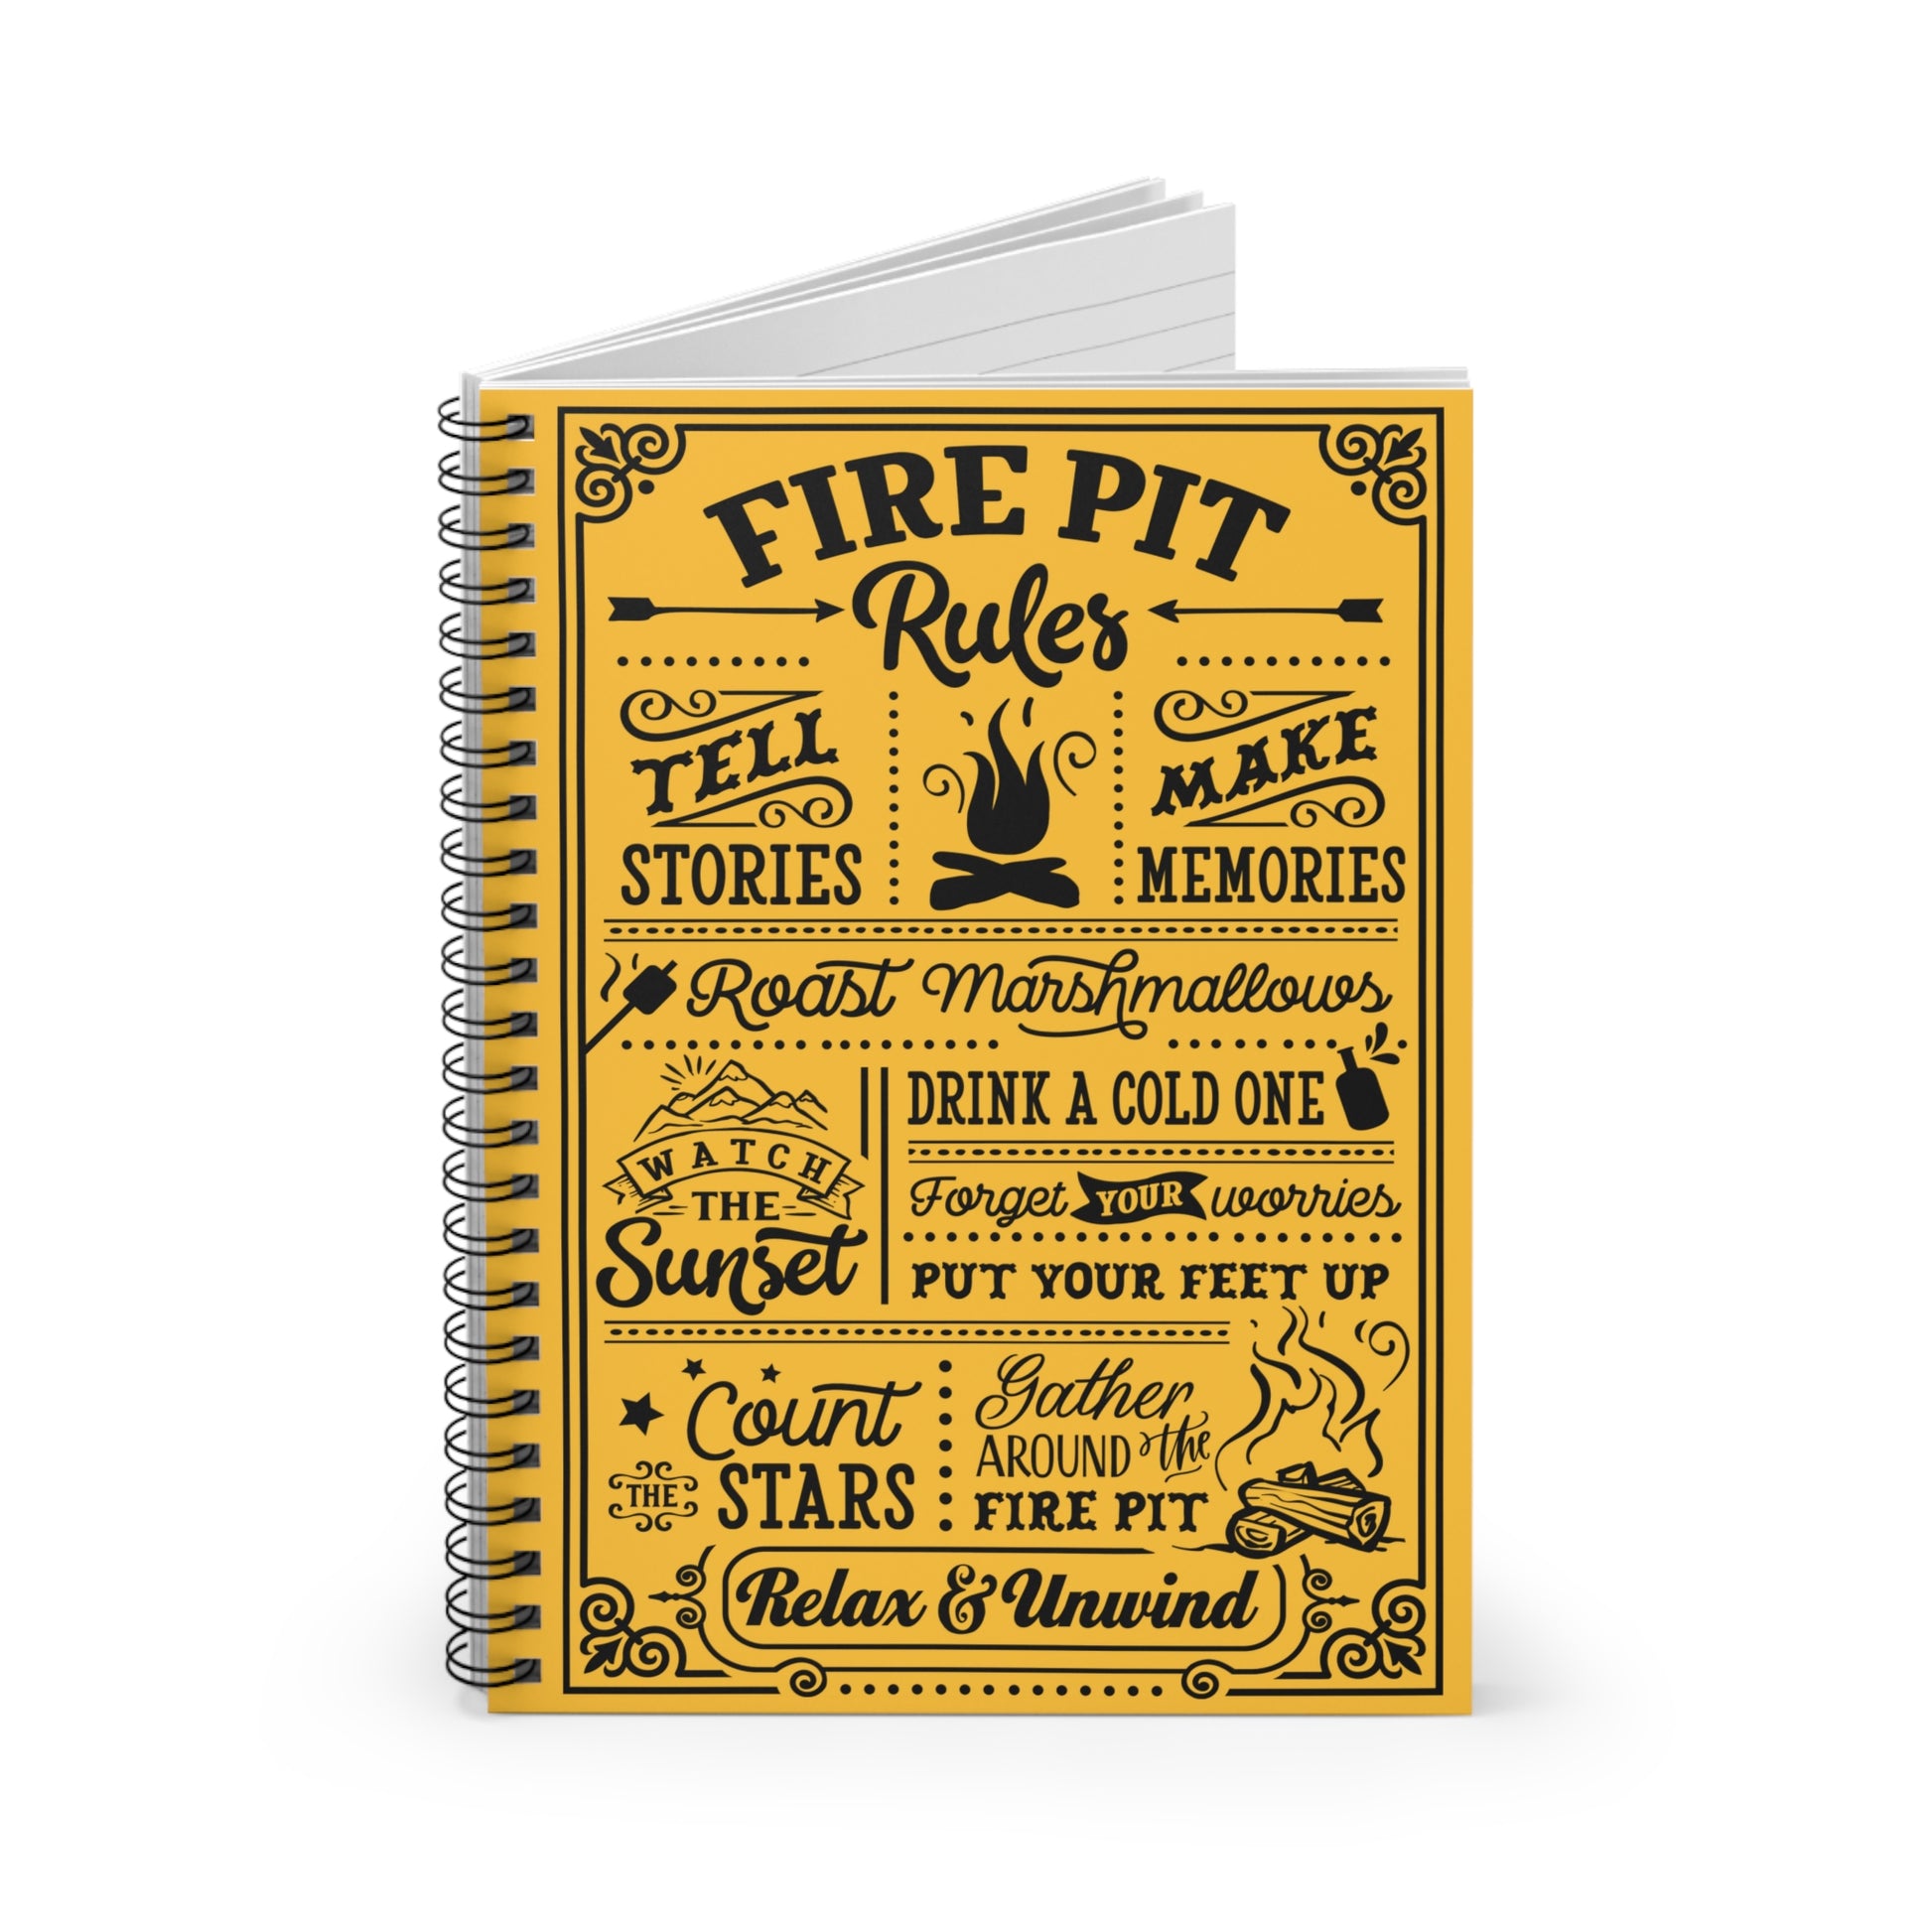 Fire Pit Rules: Spiral Notebook - Log Books - Journals - Diaries - and More Custom Printed by TheGlassyLass.com